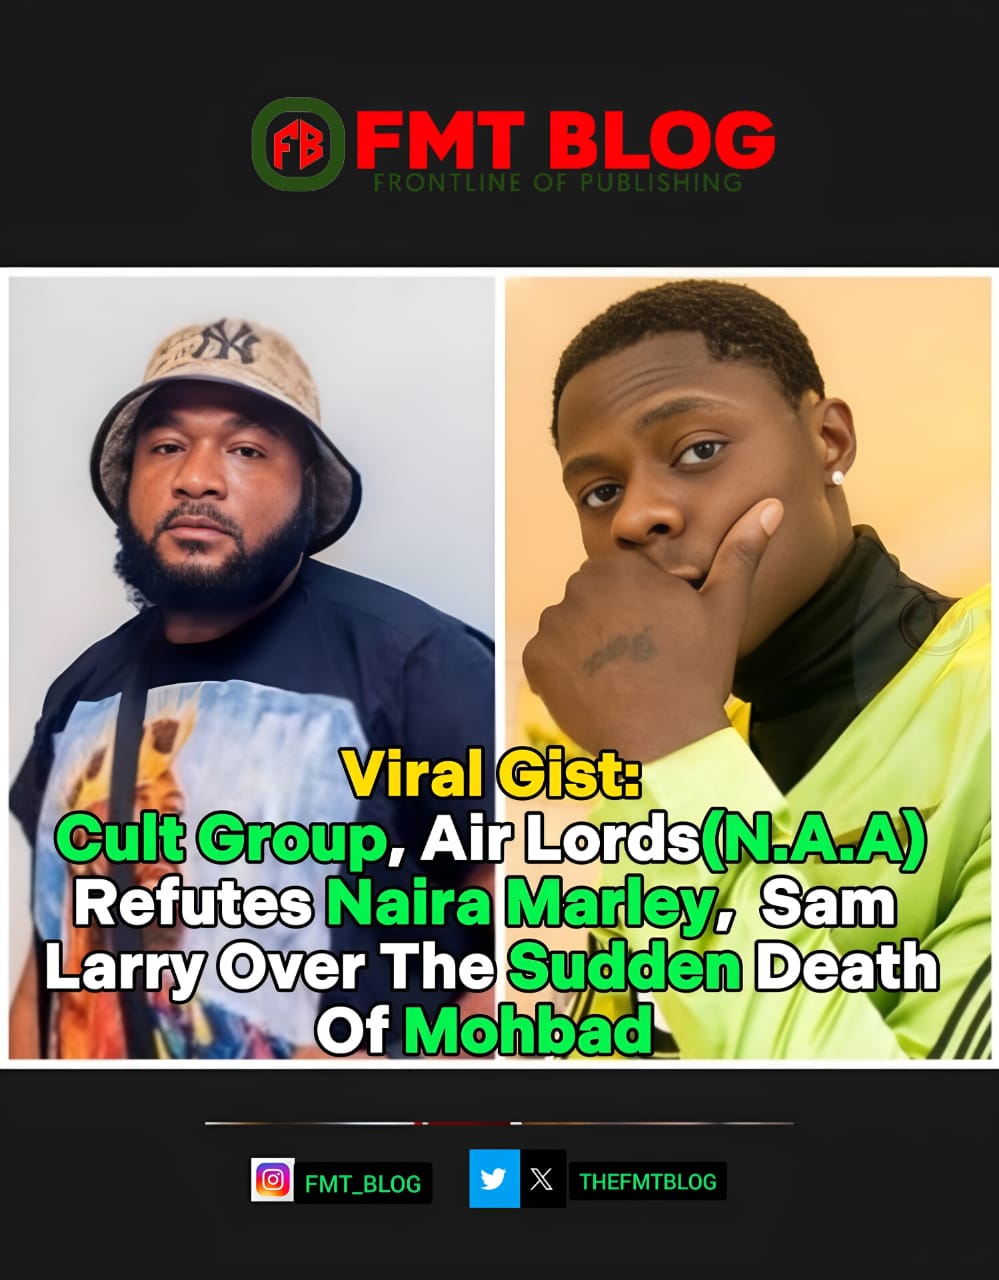 Cult Group, Air Lords Refutes Naira Marley, Sam Larry Over The Sudden Death Of Mohbad(Letter Attached)